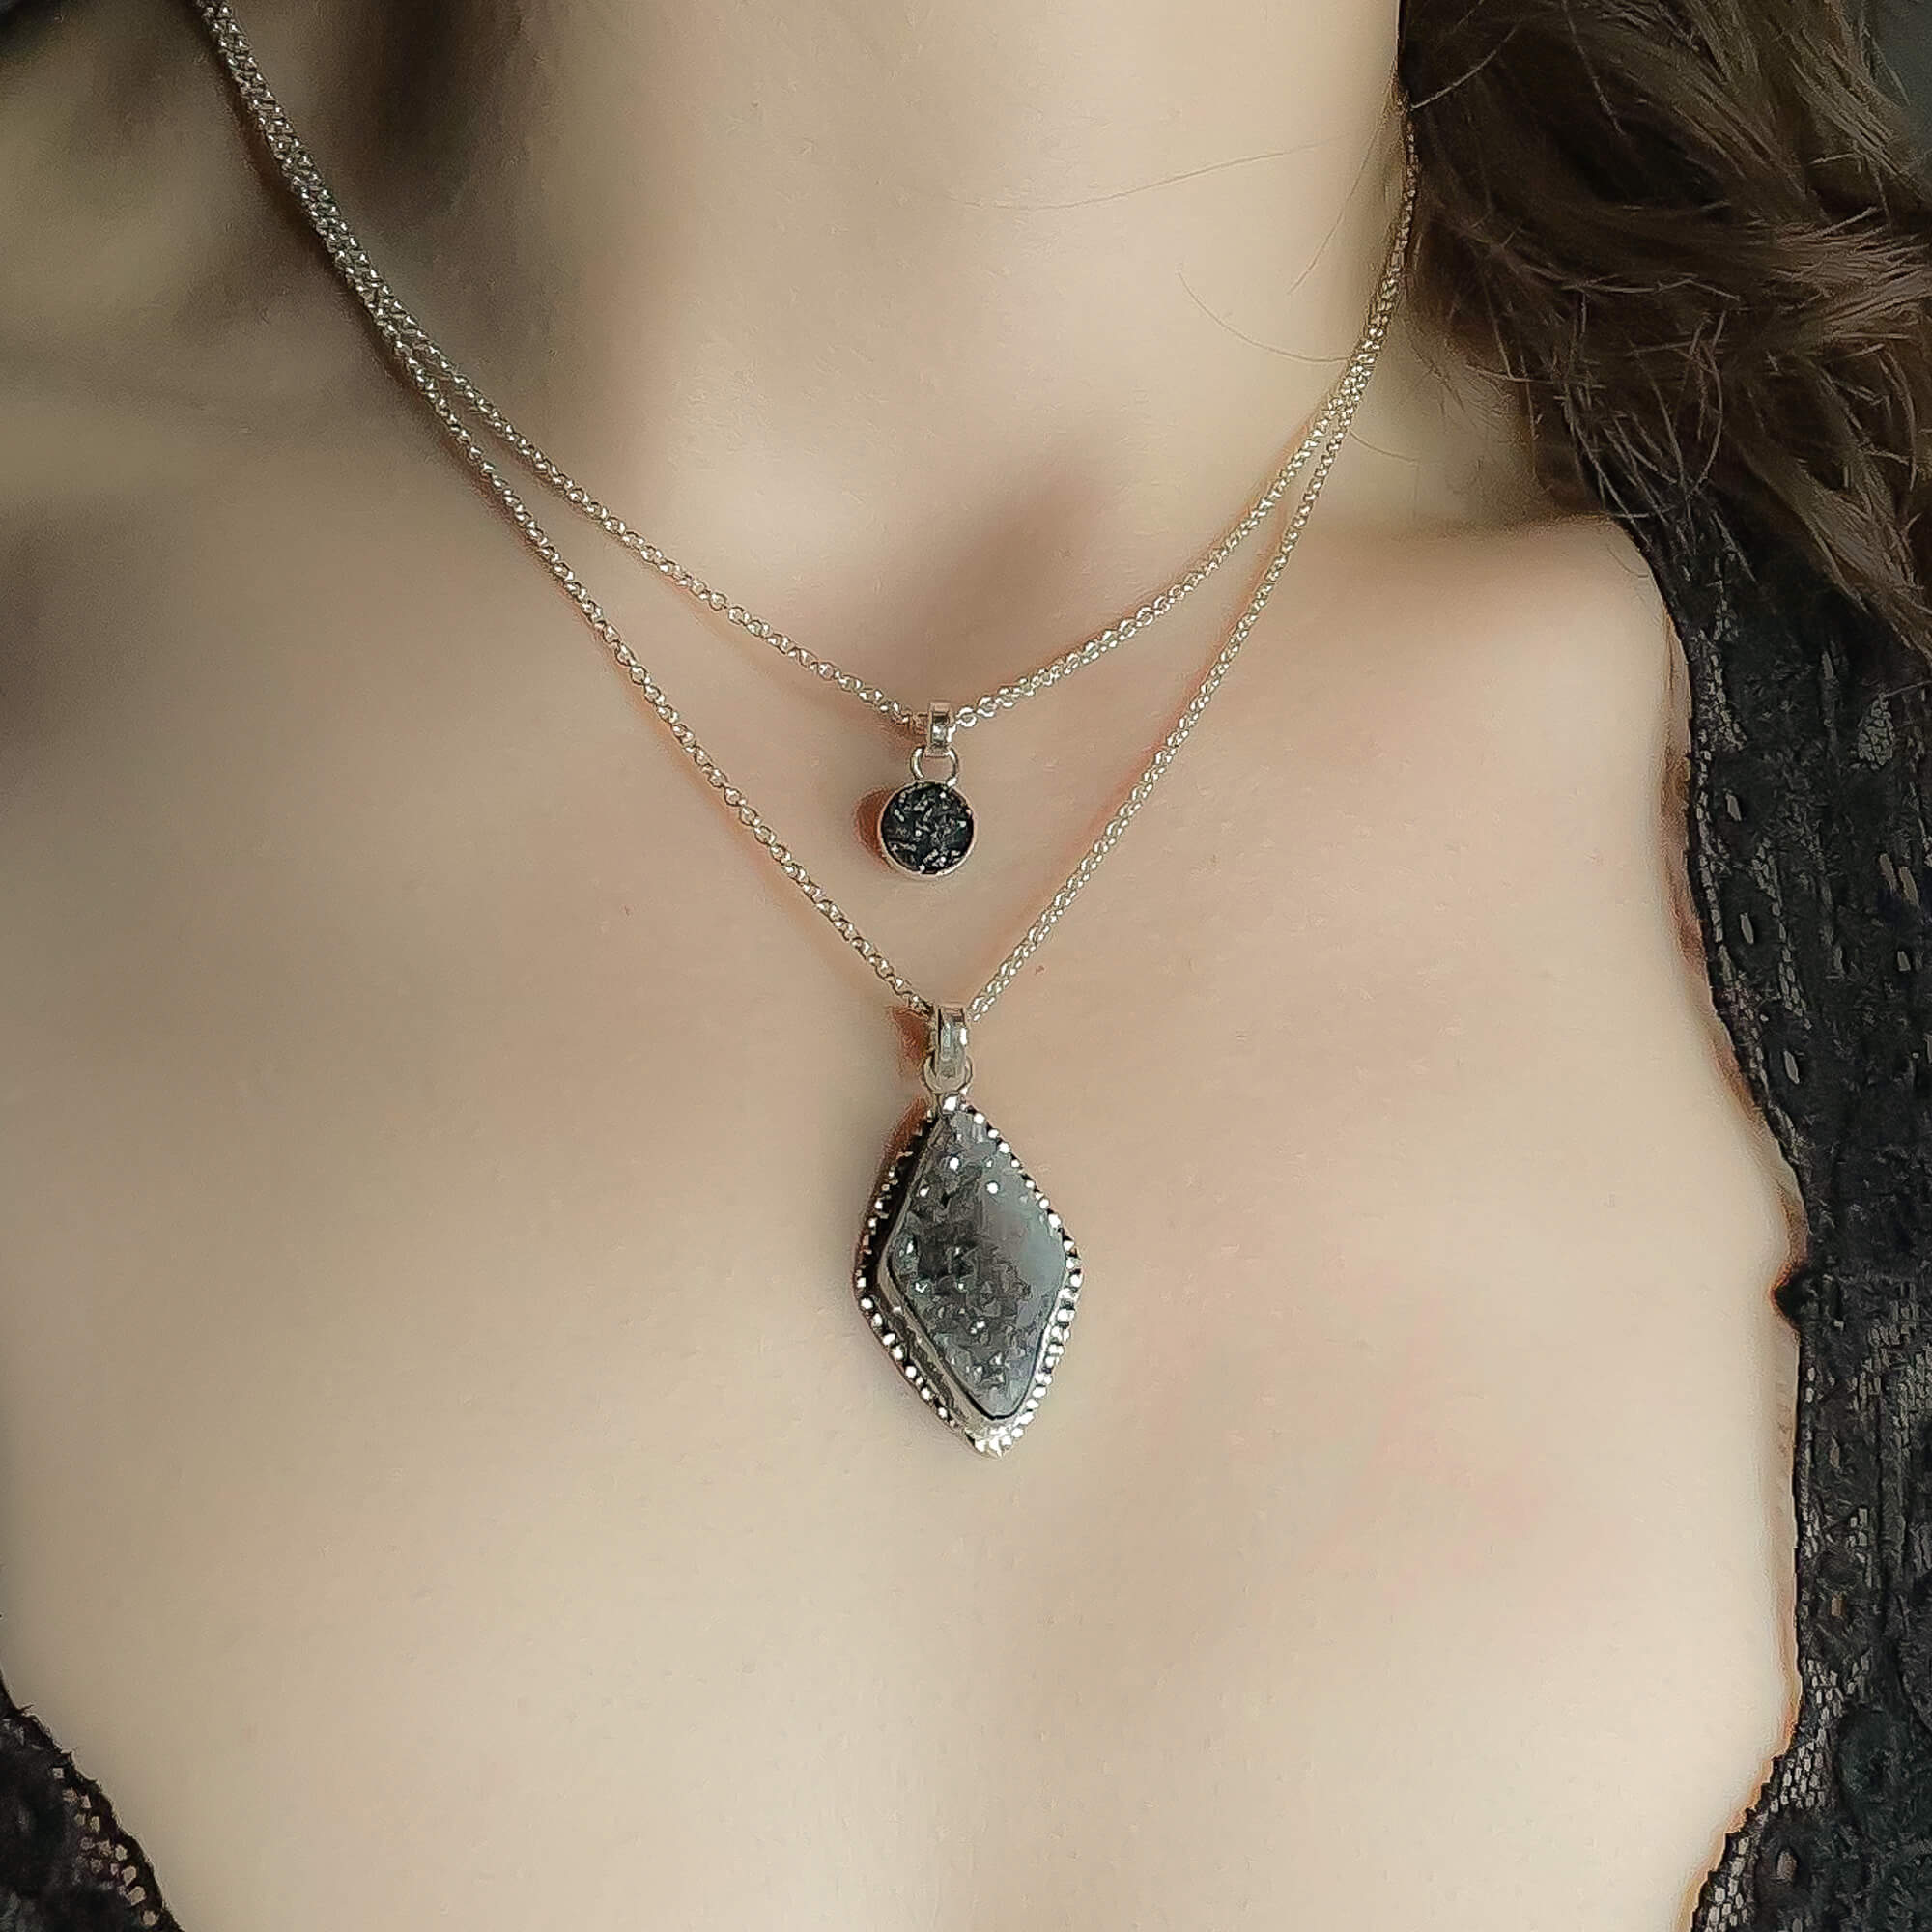 Small black druzy pendant necklace sterling silver  shown on model layered with a diamond shaped grey and black druzy pendant